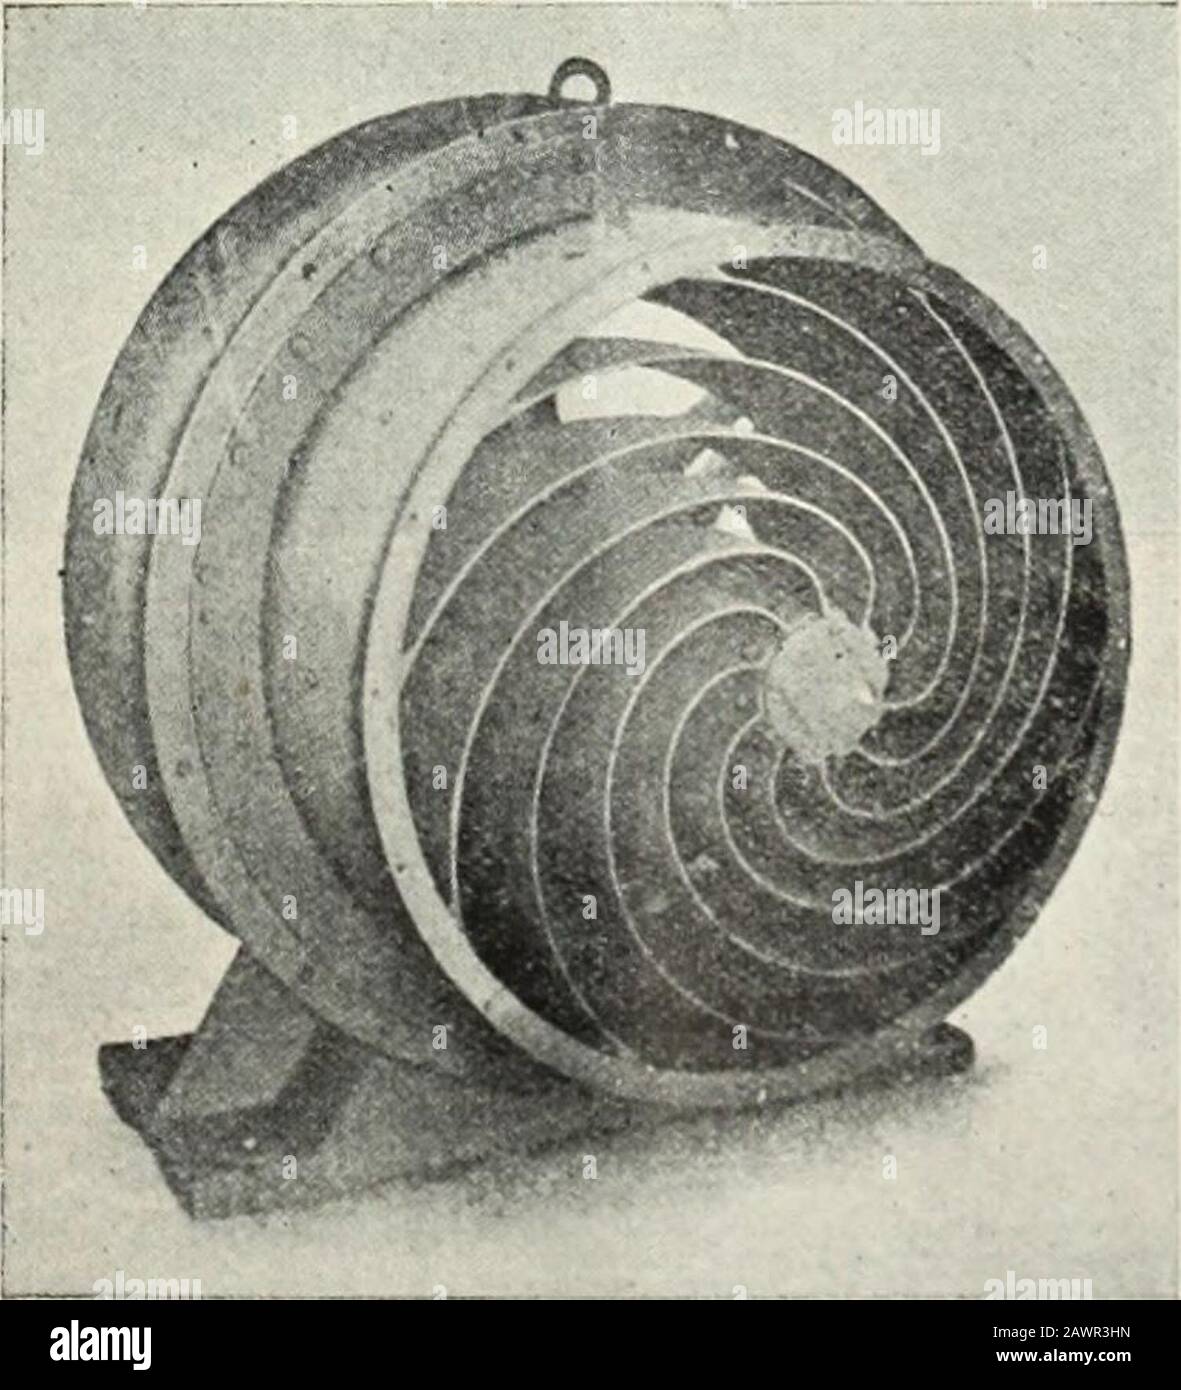 S.Amining and engineering journal . Fig. 1.—Schlotter-blower with a free shaft-end. View ofthe fan or air propeller. We have in mind a case in point, where, on a flat reef.mostly in soft picking ground, the monthly footage wastrebled with the same labour force, due solely and entirelyto the provision of a fan and pipe line. In the case of blasting ground the exhaust from themachines cannot compensate for a supply of fresh air. andit is established by test that the most efficient means ofsupplying this necessary air is by means of an electrically-driven fan. Setting aside therefore both air and Stock Photo